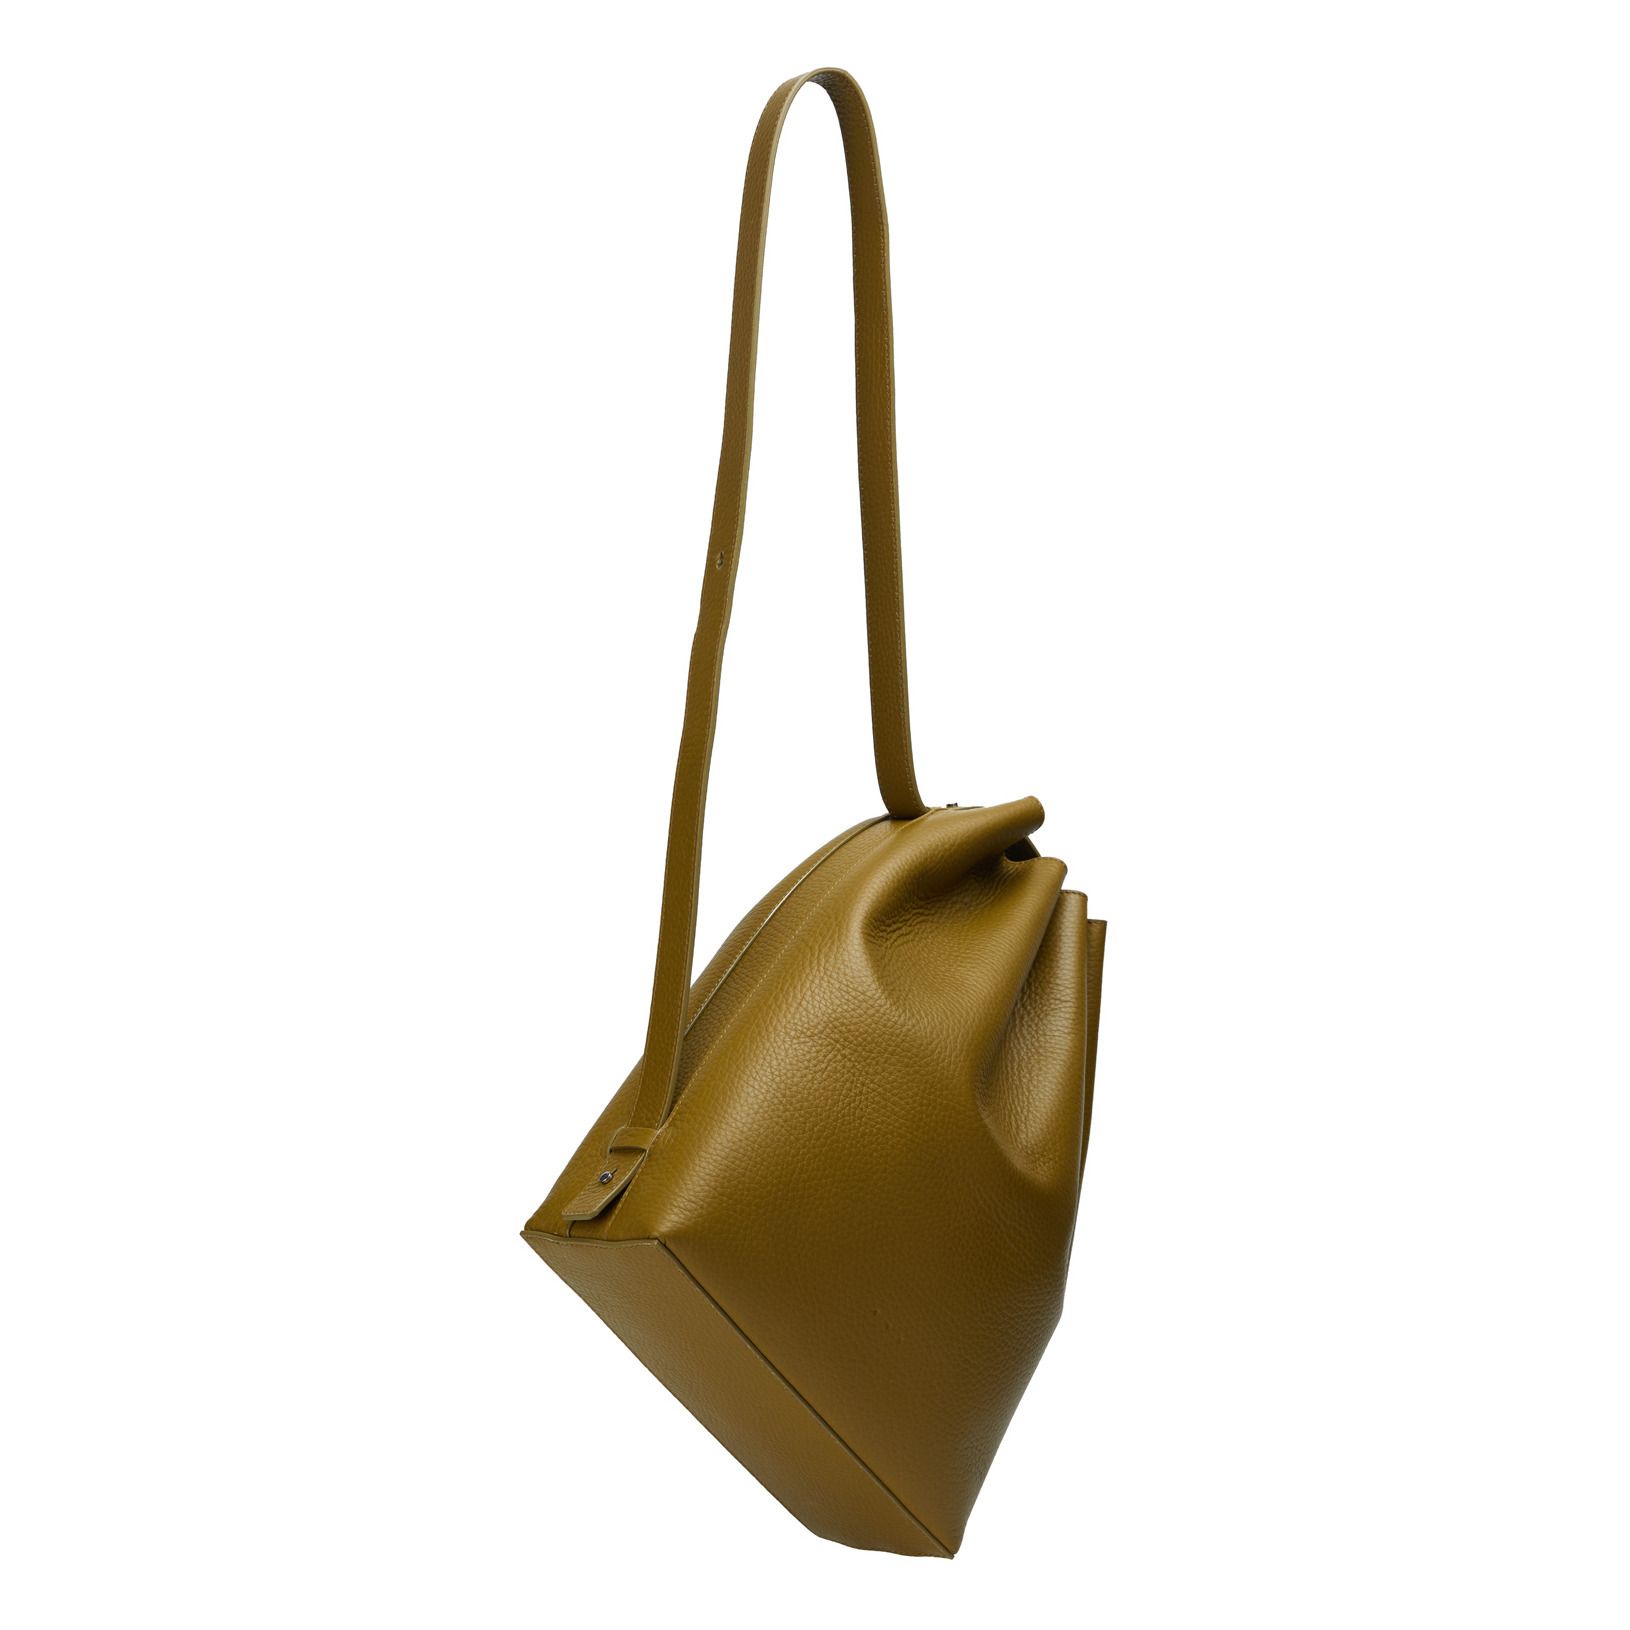 Buy AESTHER EKME Beige Maxi Marin Bag - 192 Cappuccino At 40% Off